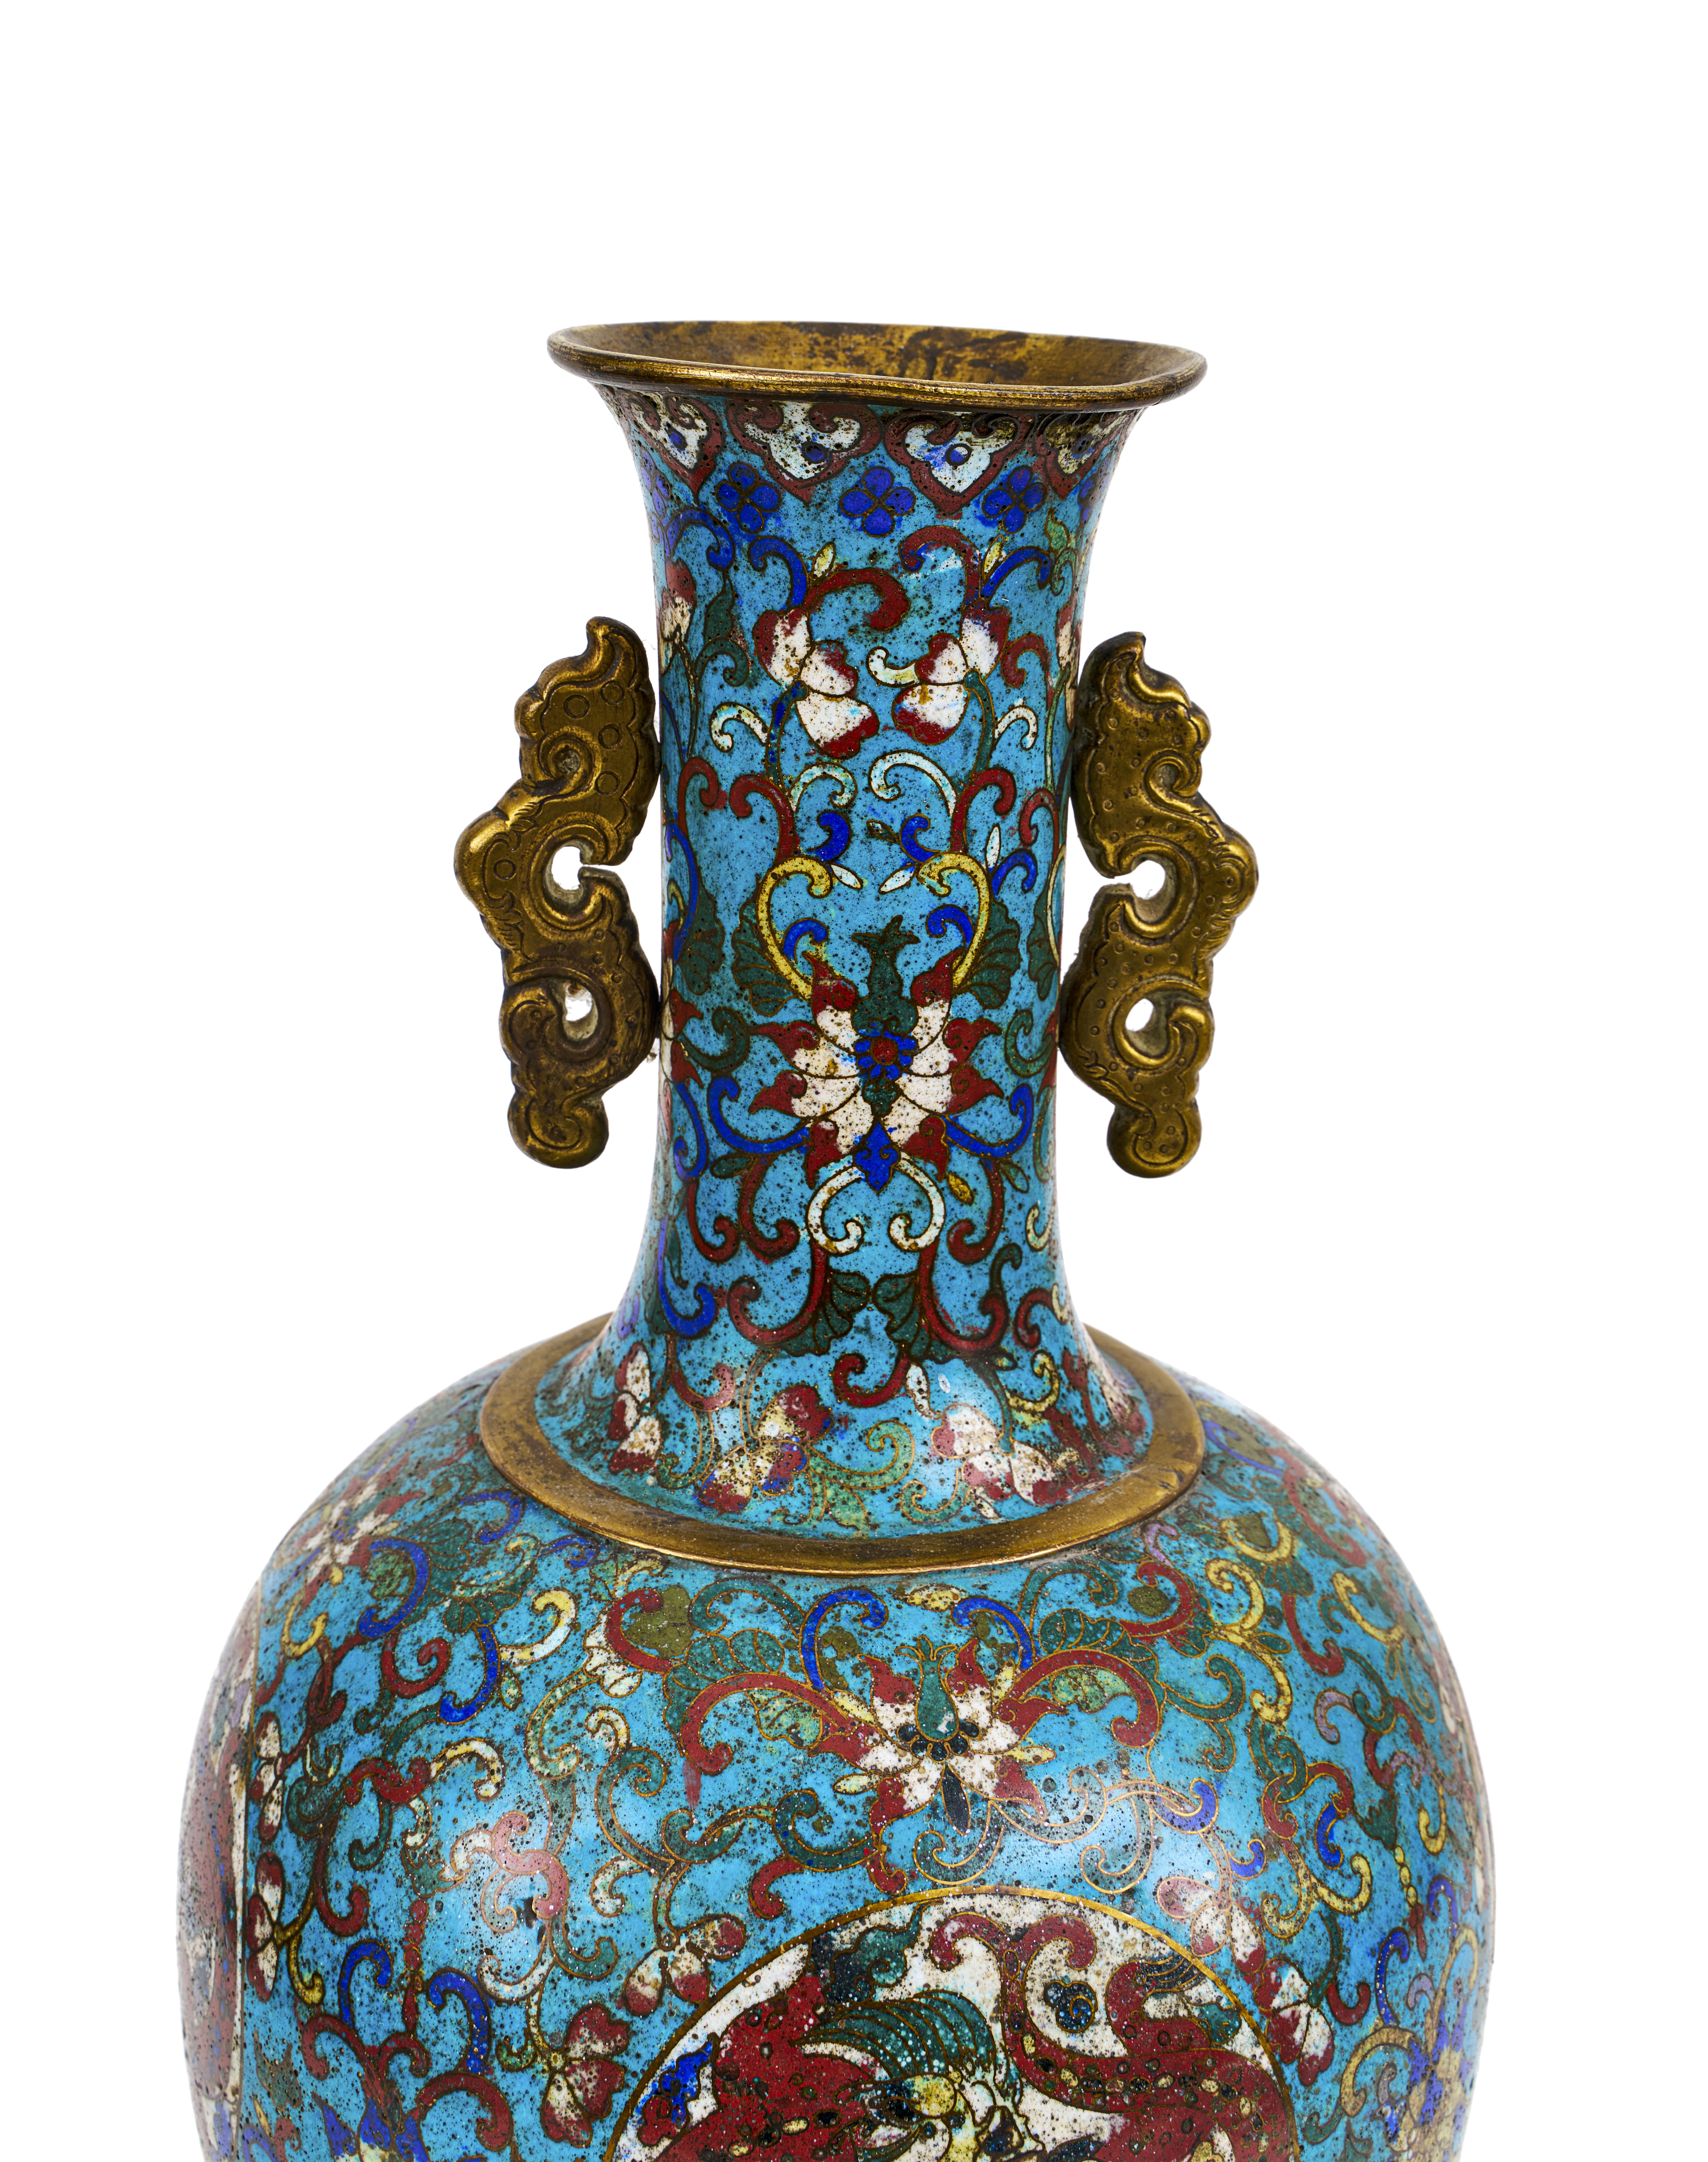 A LARGE CHINESE CLOISONNE VASE, QIANLONG PERIOD (1736-1795) - Image 3 of 5